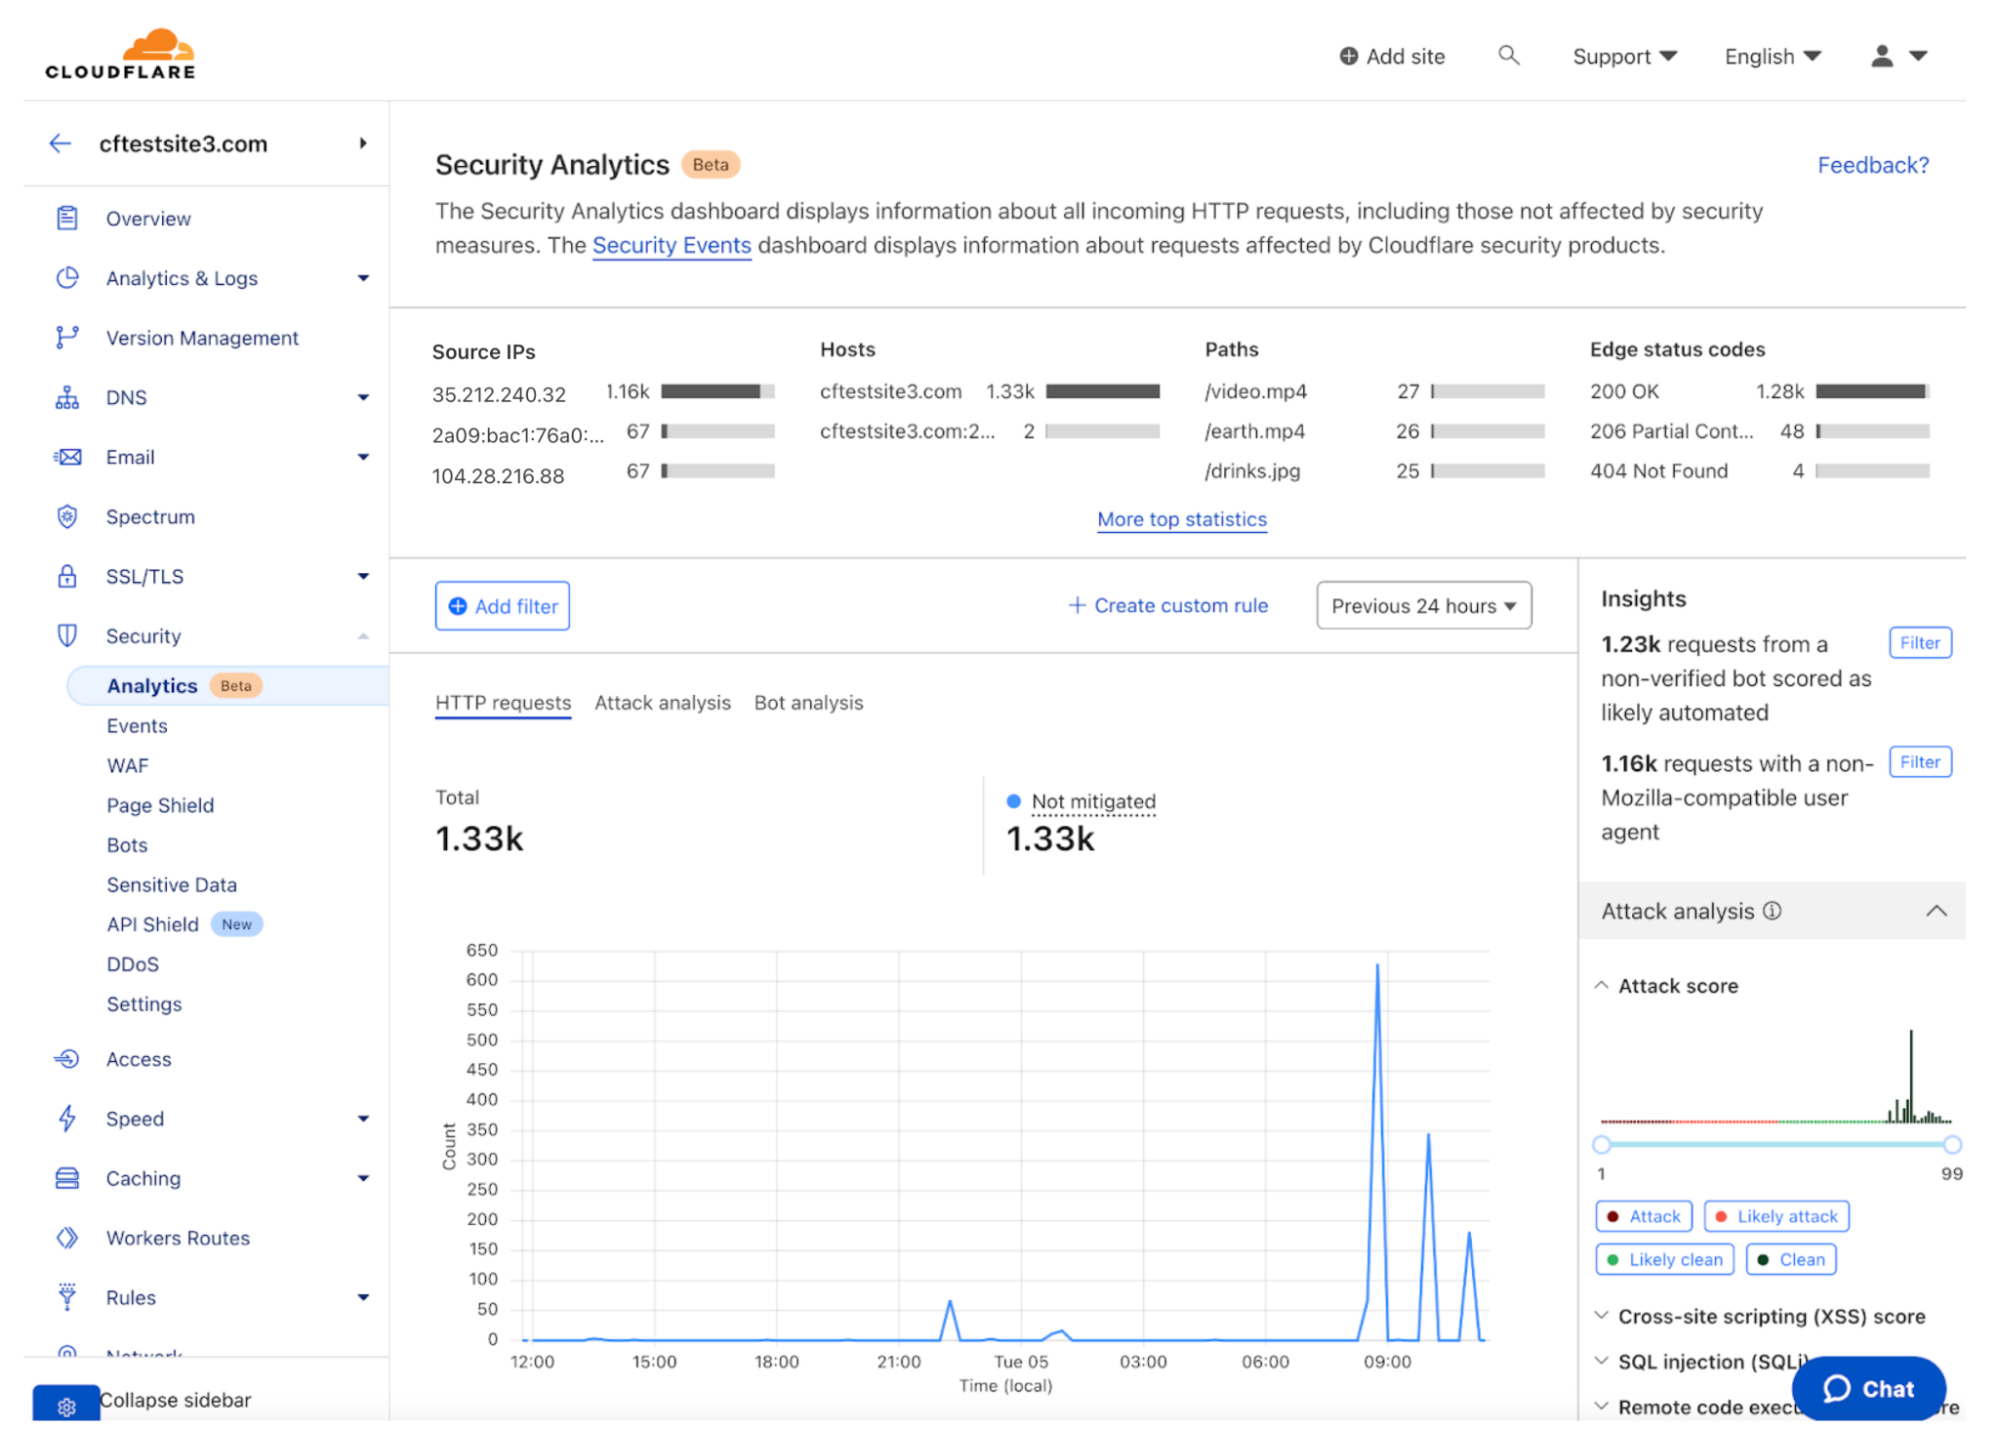 Cloudflare Security Analytics brings together all of Cloudflare’s detection capabilities in one place.